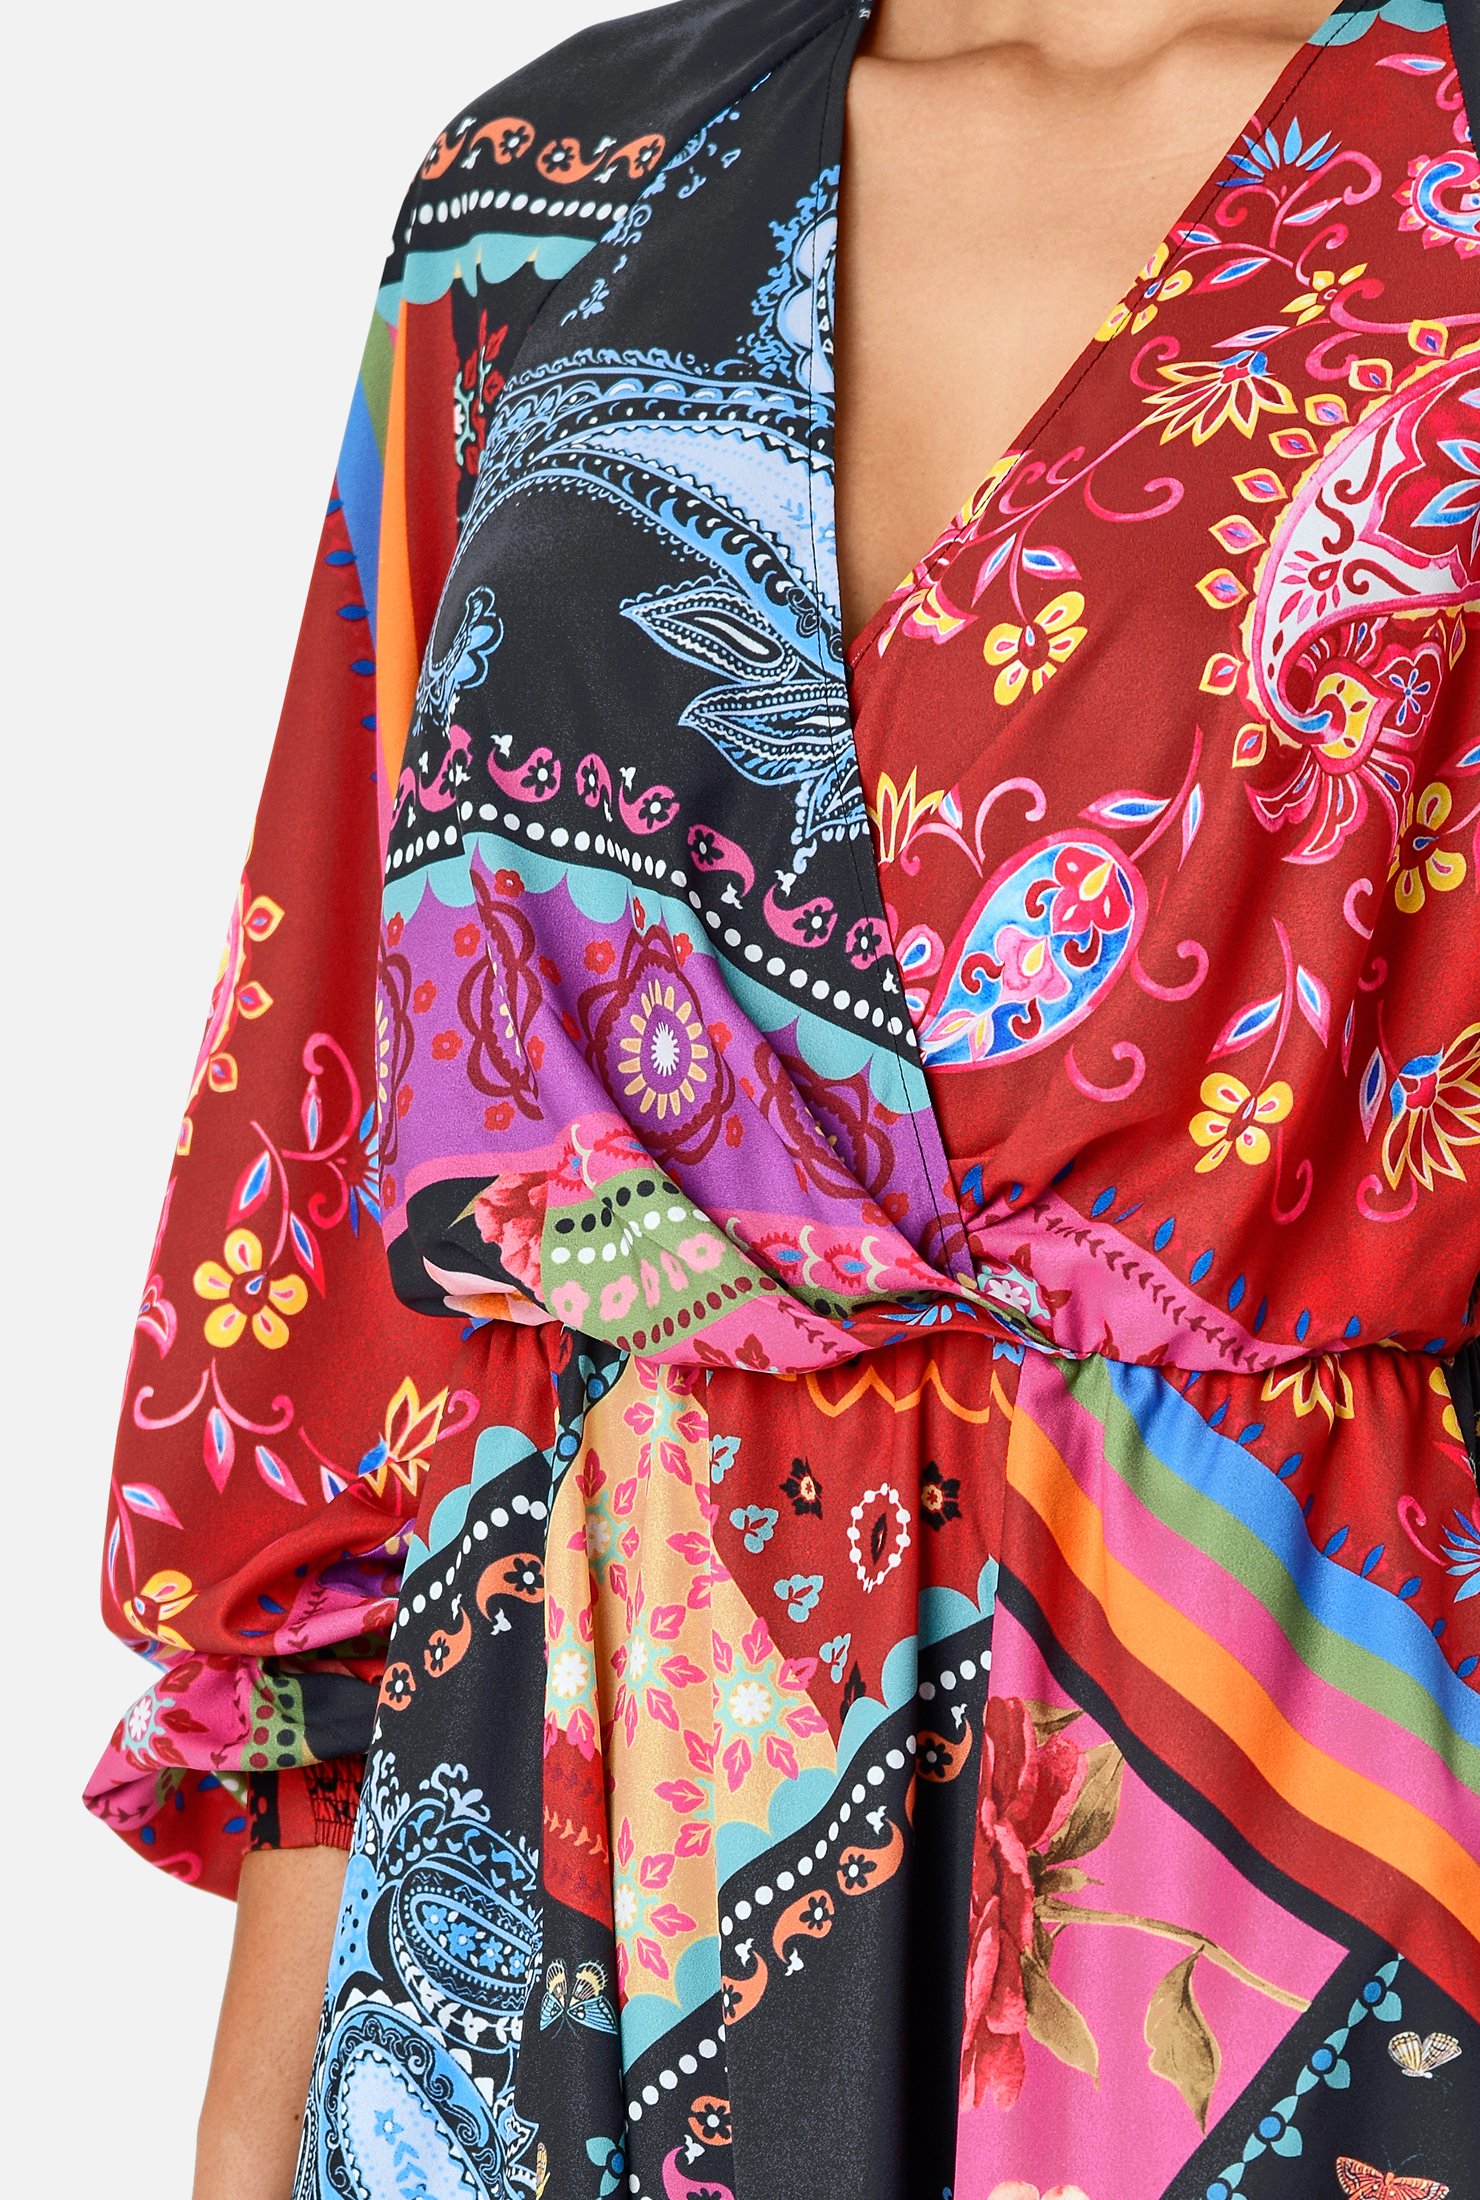 Bold brilliance! A blouson surplice bodice and ruched pleat full skirt enhance the playful drape of our robe-style crepe dress in a colorful scarf print cinched in at the elastic waist.